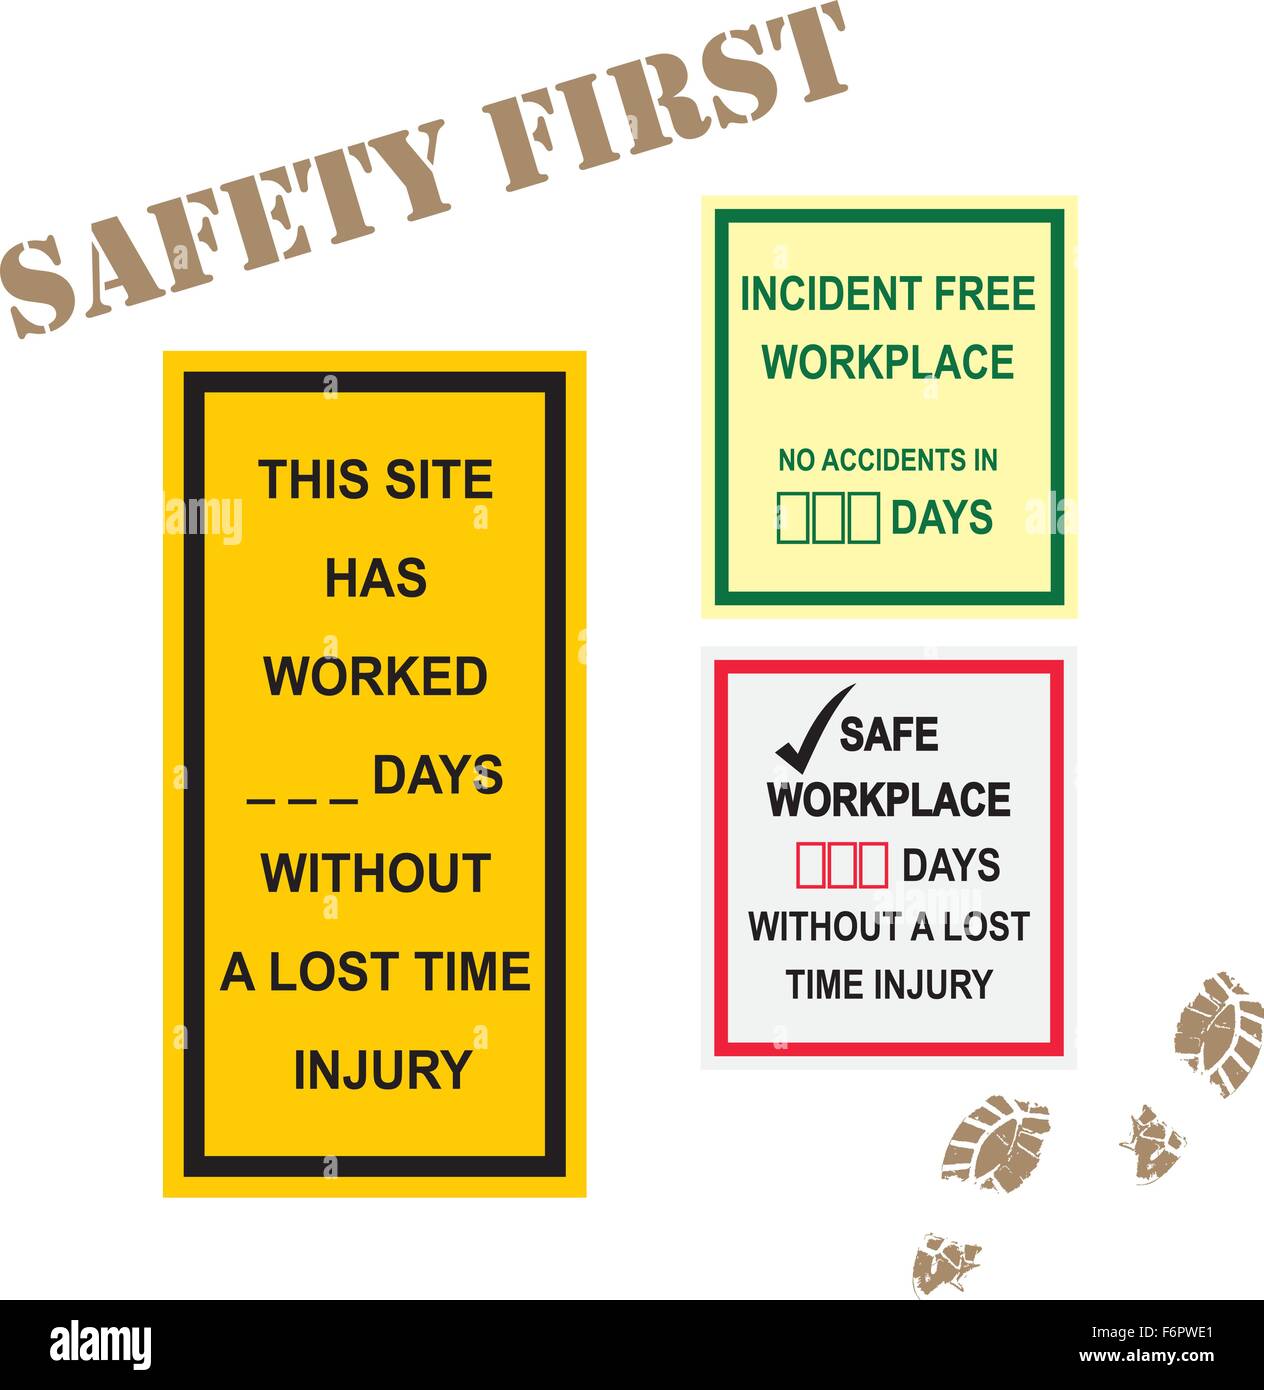 Workplace safety signs for incident free time and lost time injury in days Stock Vector